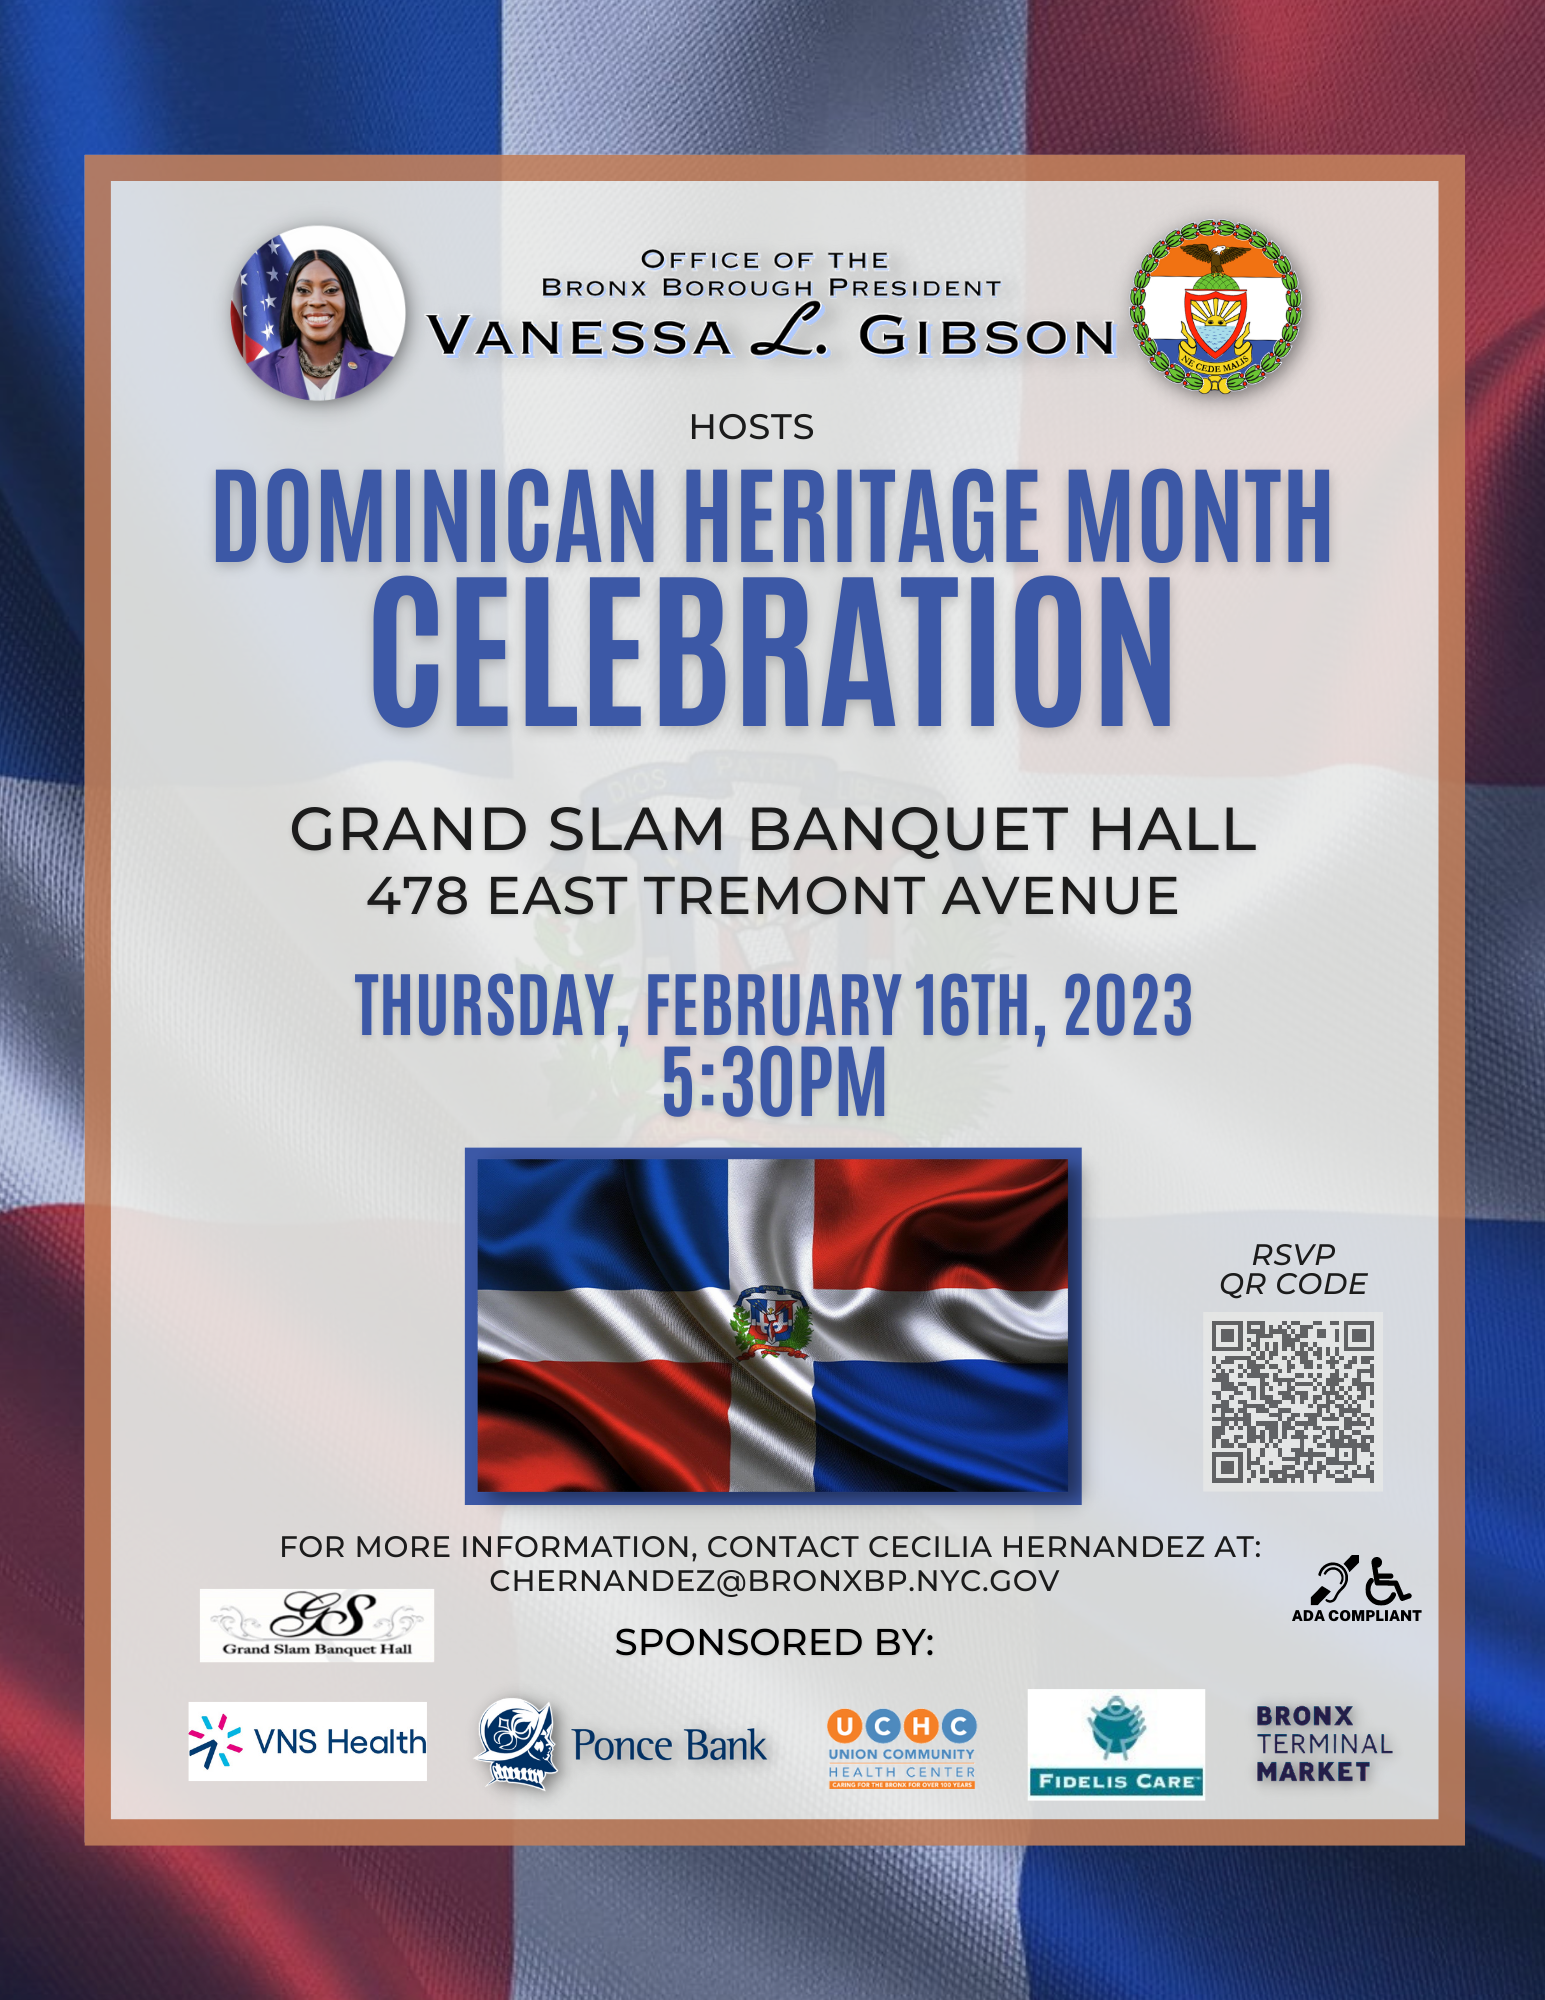 Dominican Heritage Month Celebration on February 16, 2023 at 5:30 PM - contact chernandez@bronxbp.nyc.gov for details